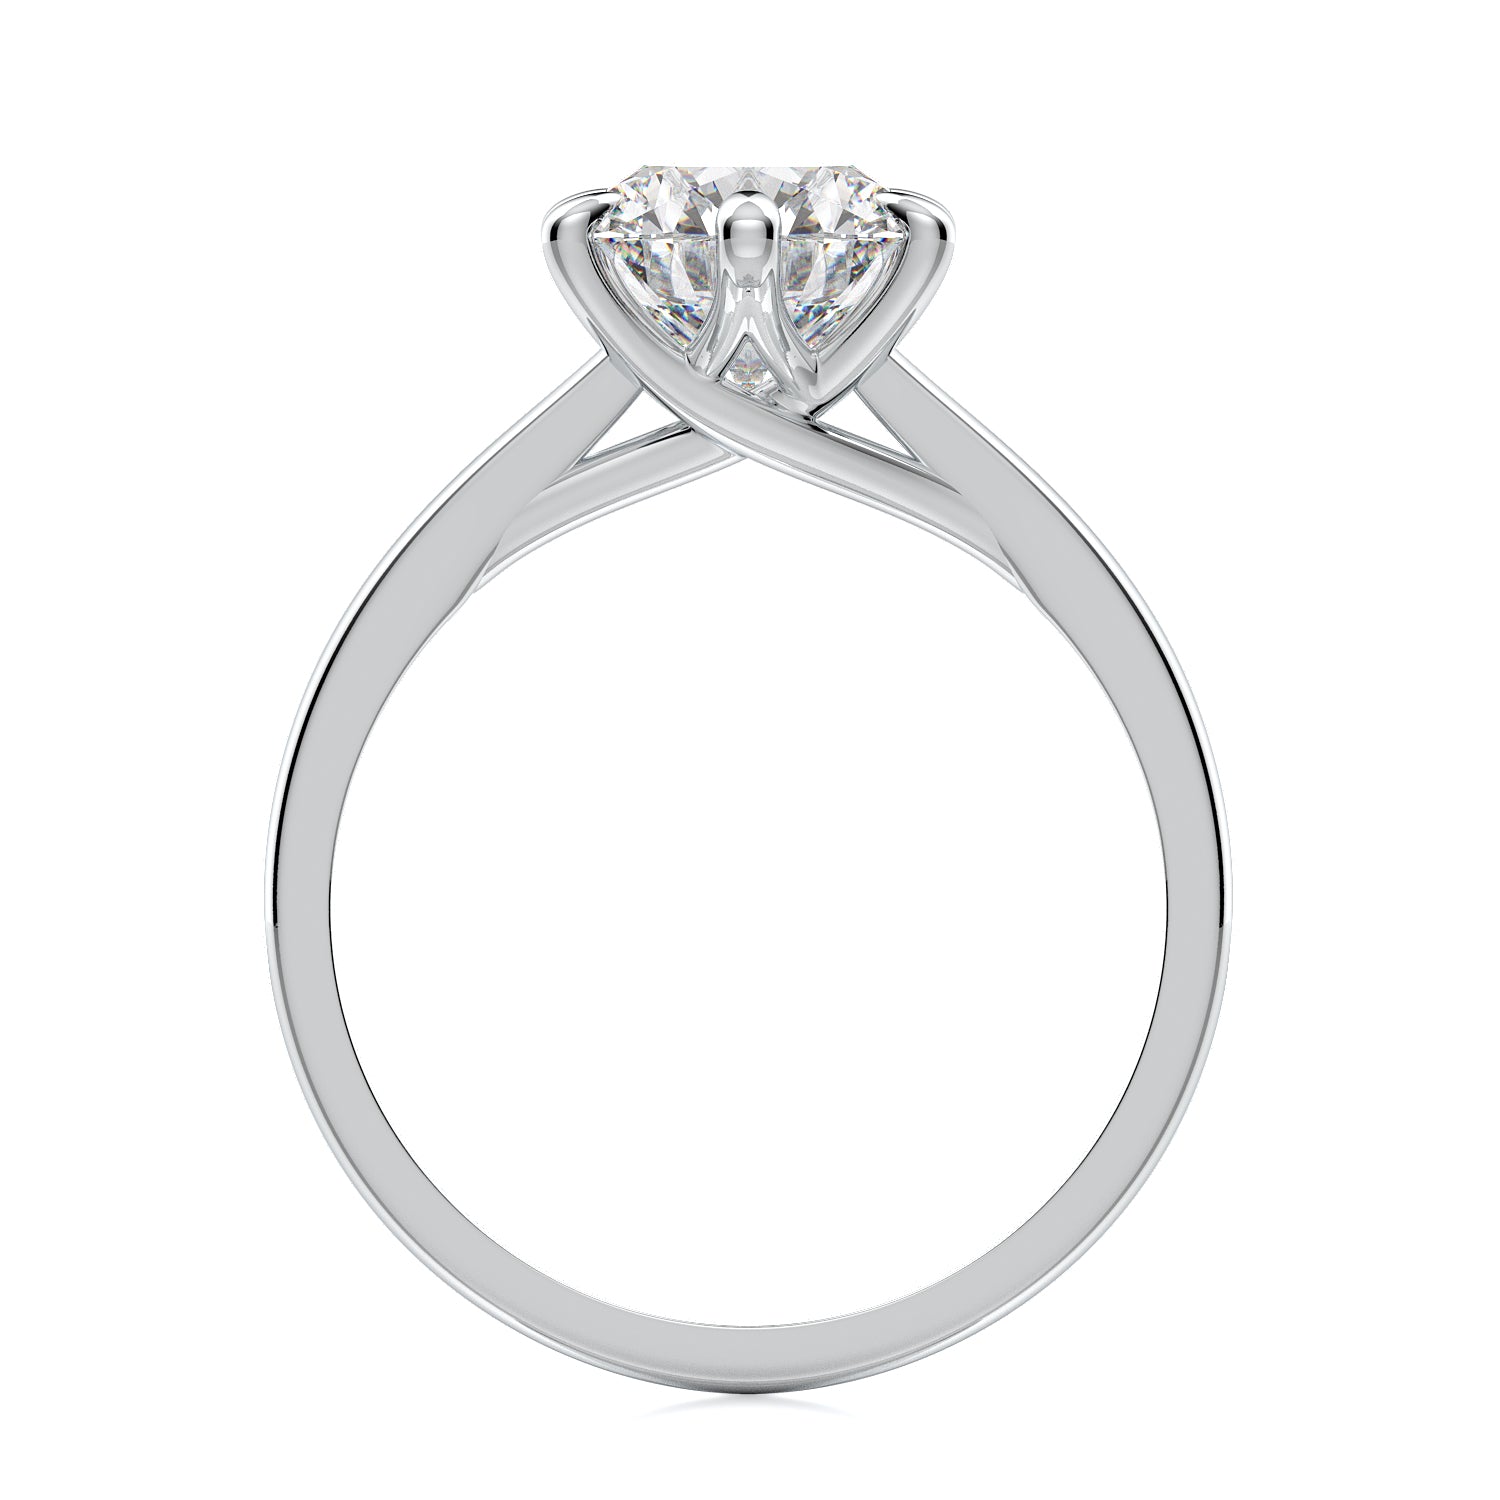 Solitaire Ring Designs at best price in Mumbai by G-Nex/Diamond'S Heritage  | ID: 6924211148